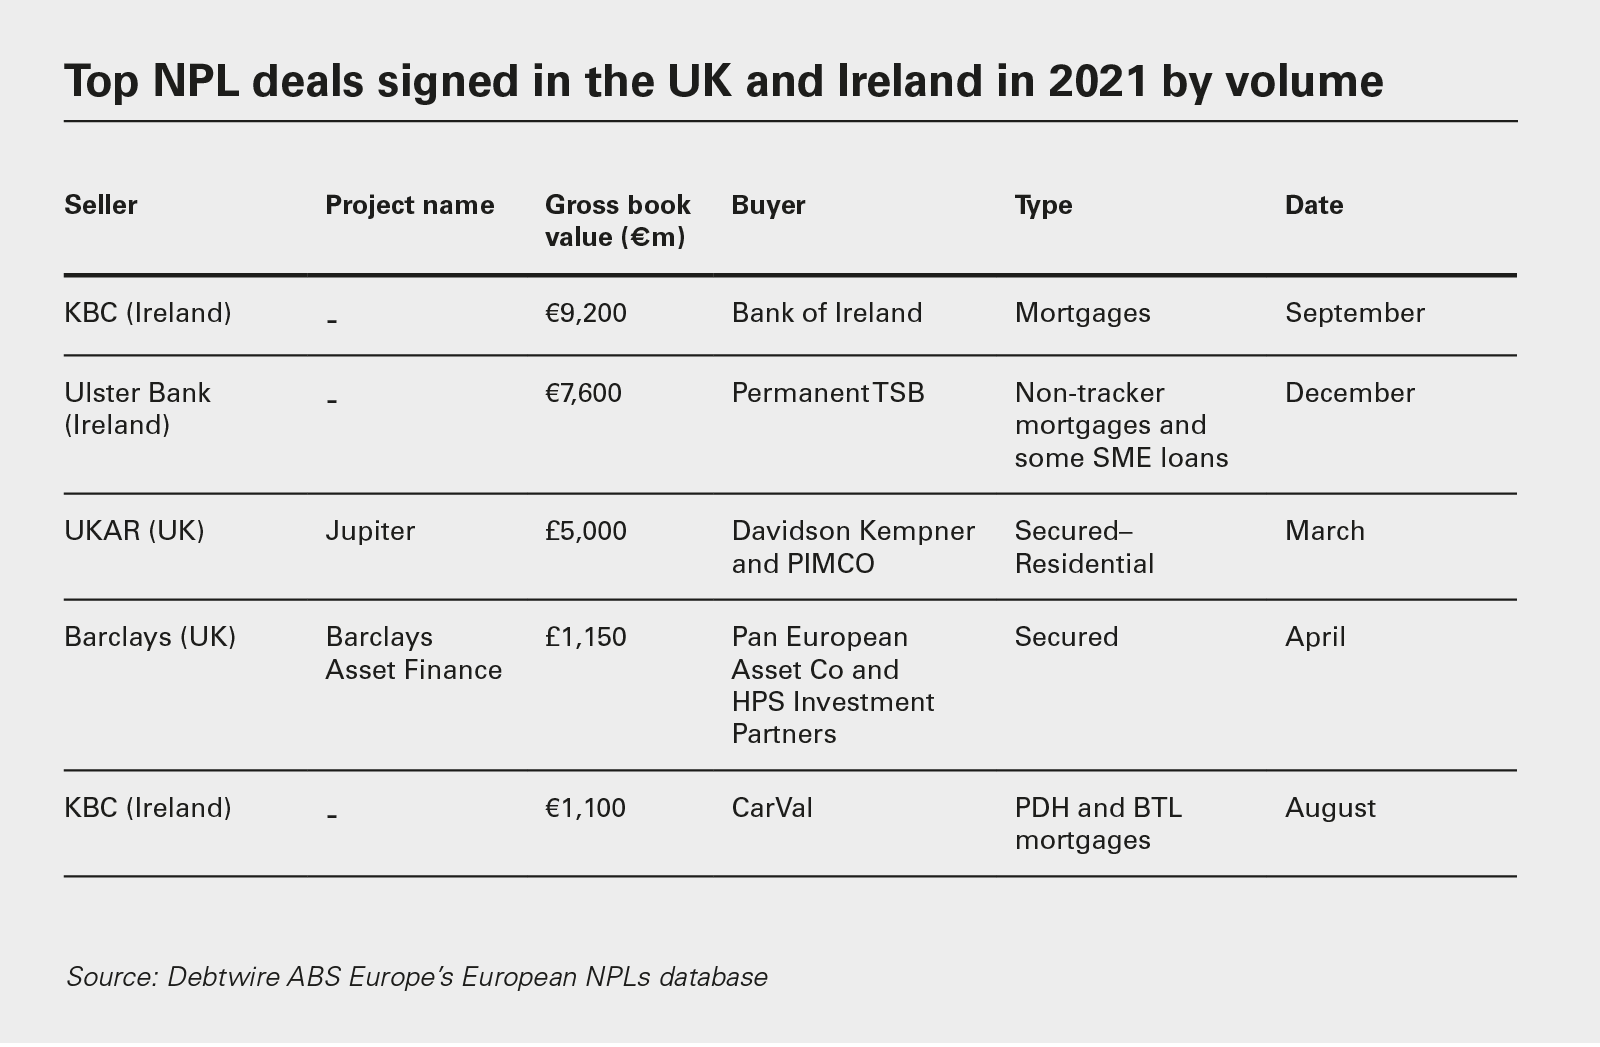 Top NPL deals signed in the UK and Ireland in 2021 by volume